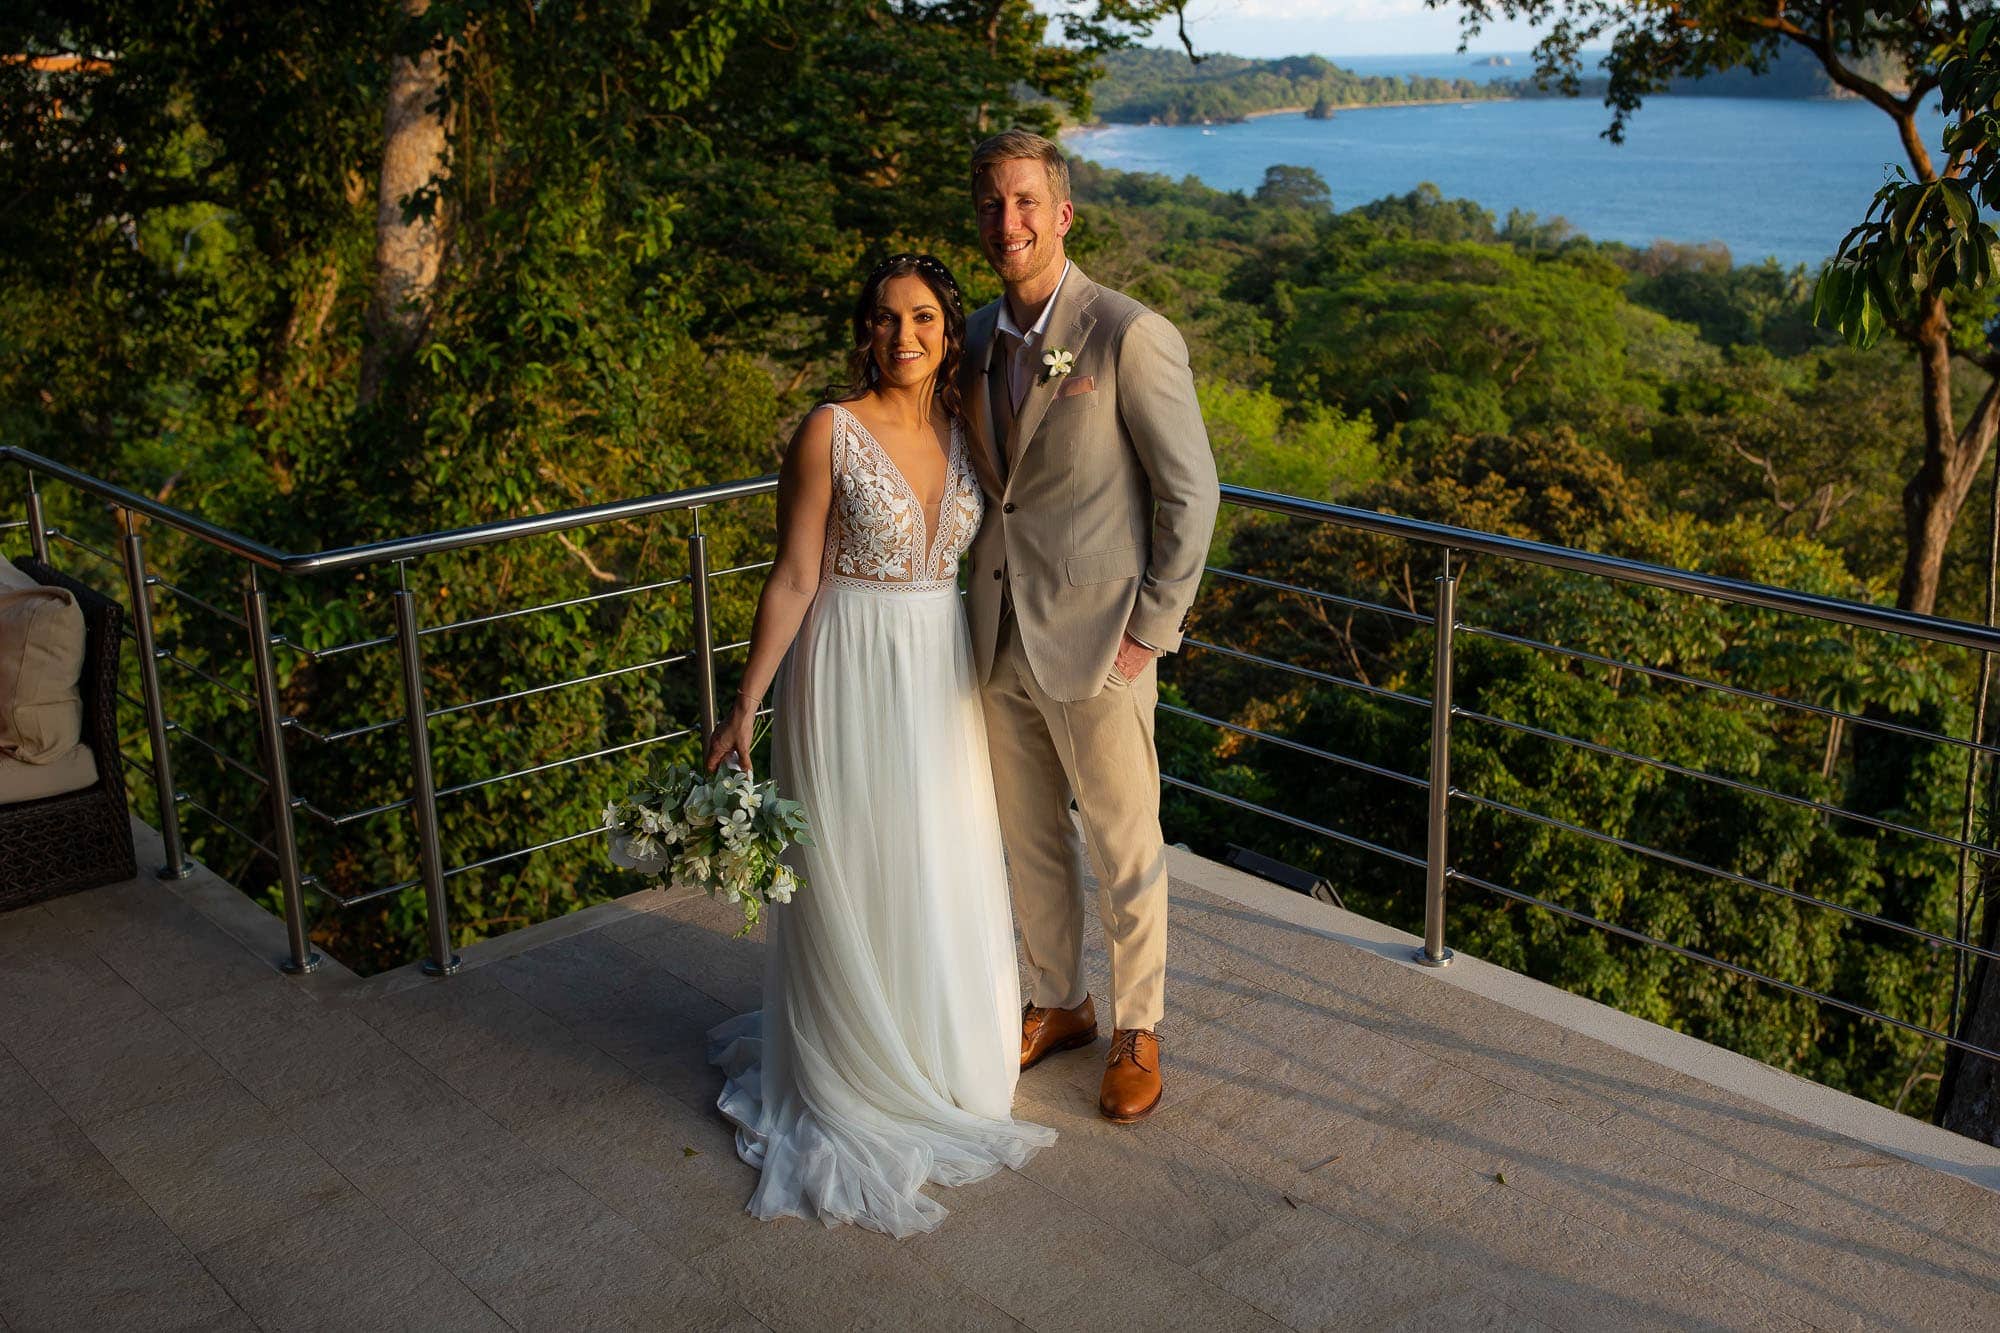 The bride and groom with the view at Vista Hermosa